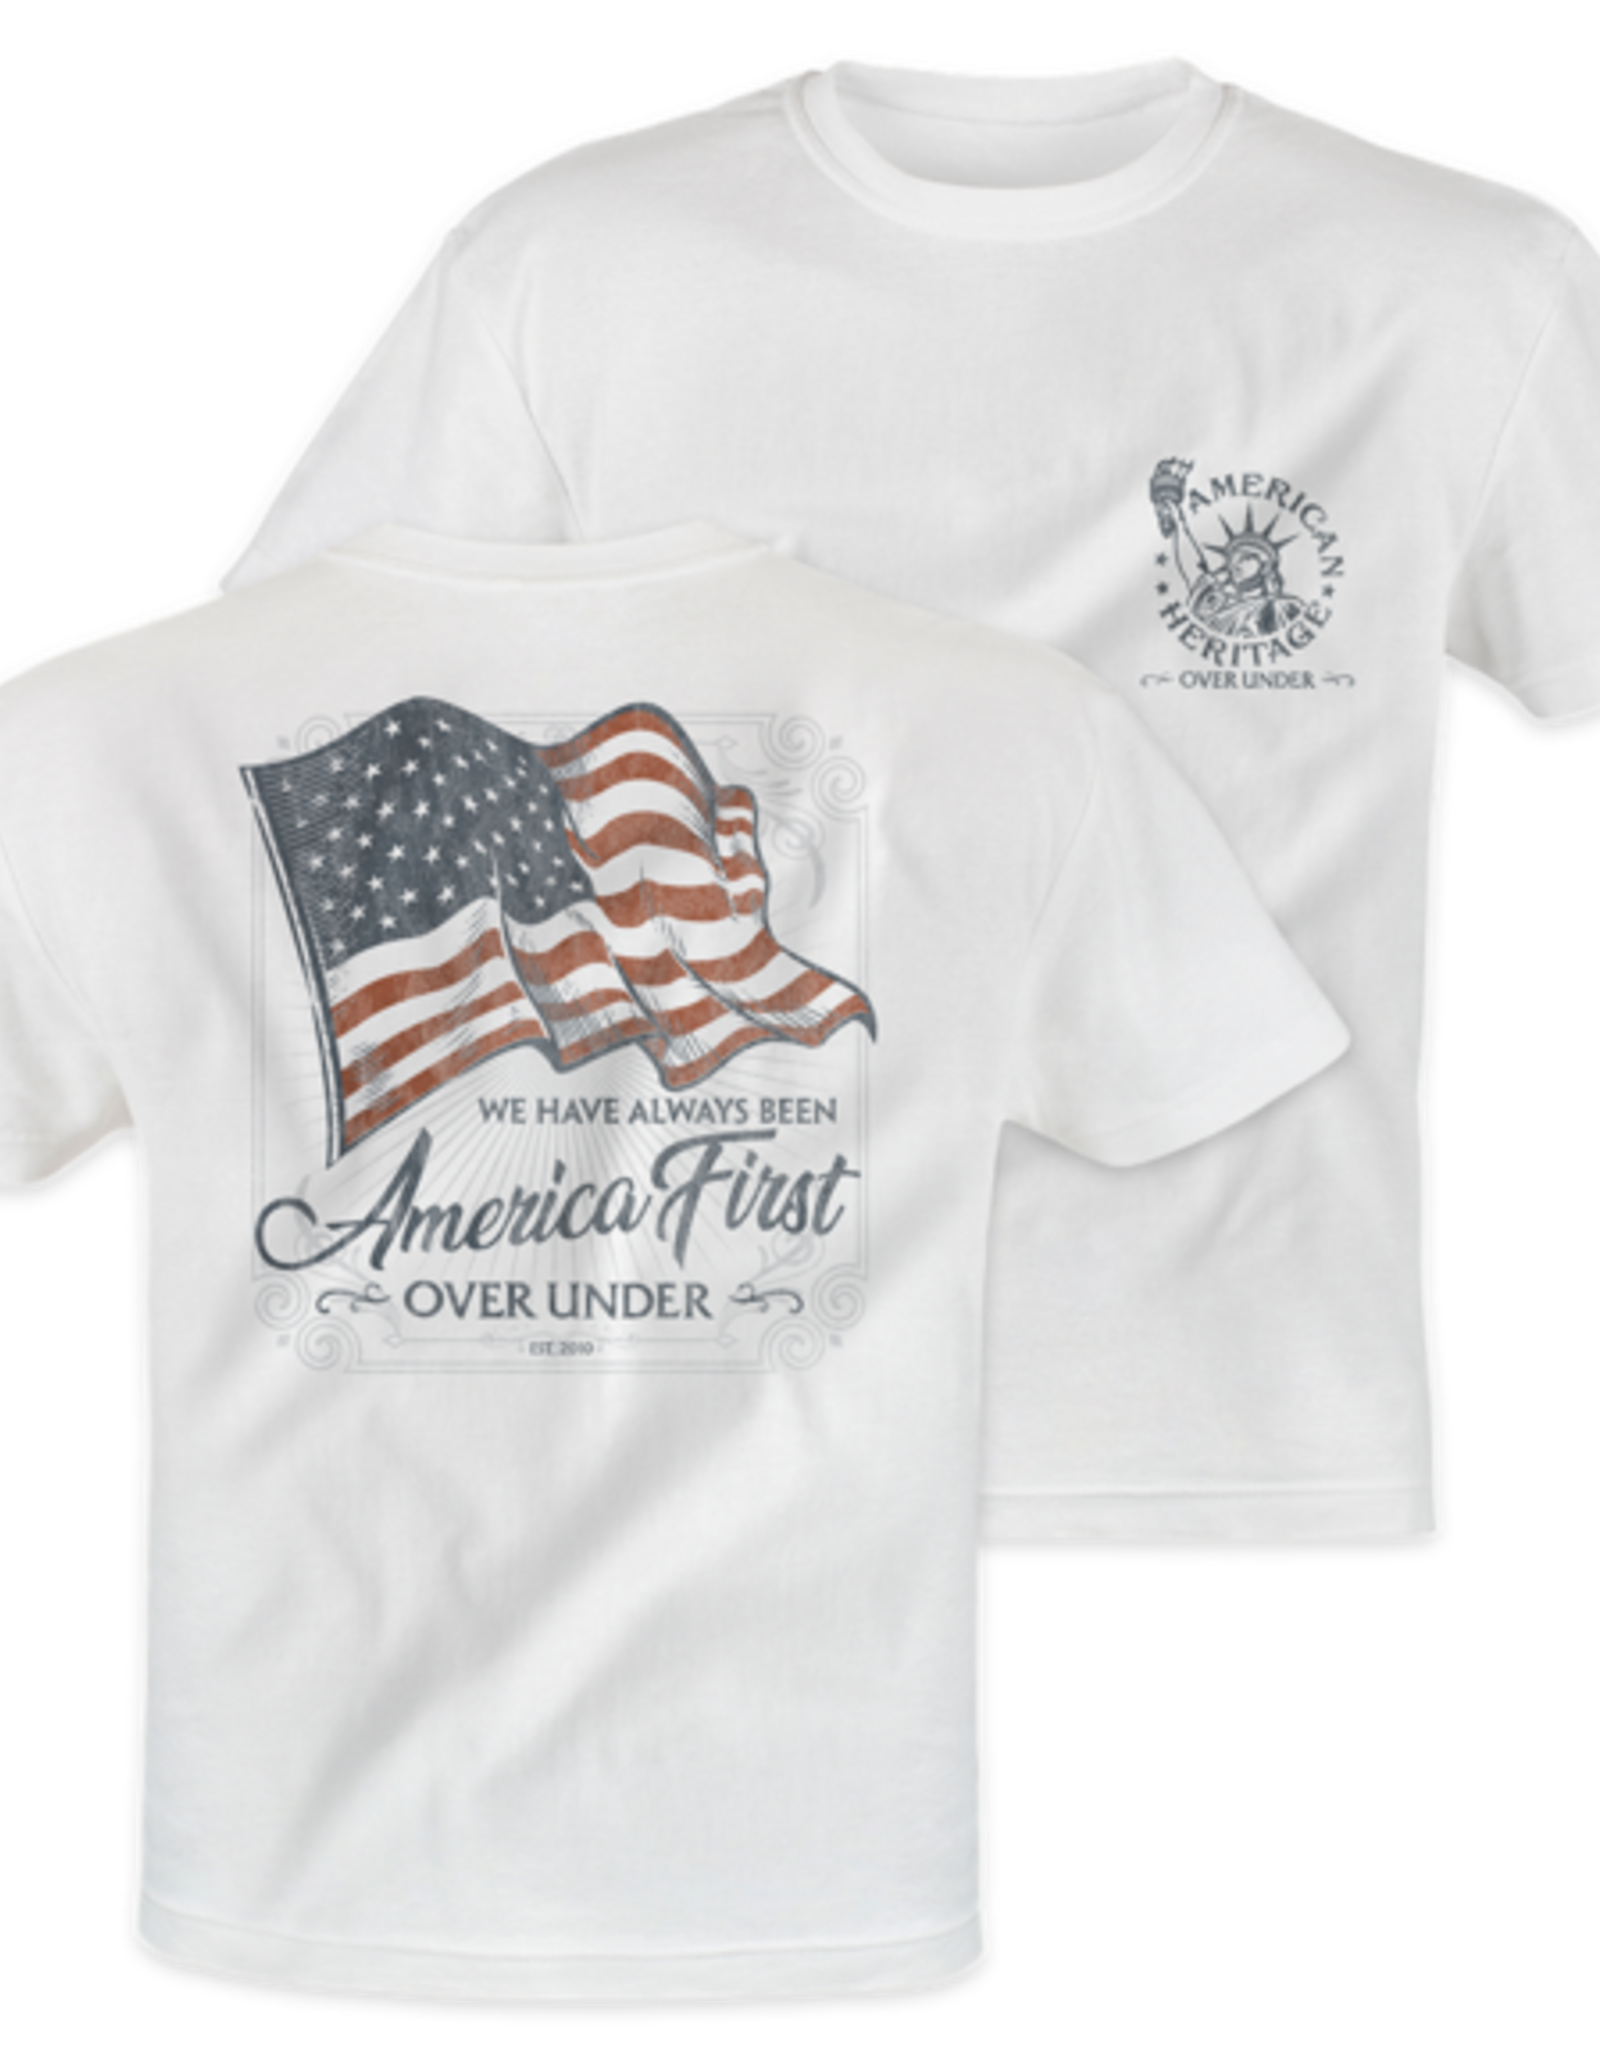 Over Under Clothing AH1025 - America First SS Tee